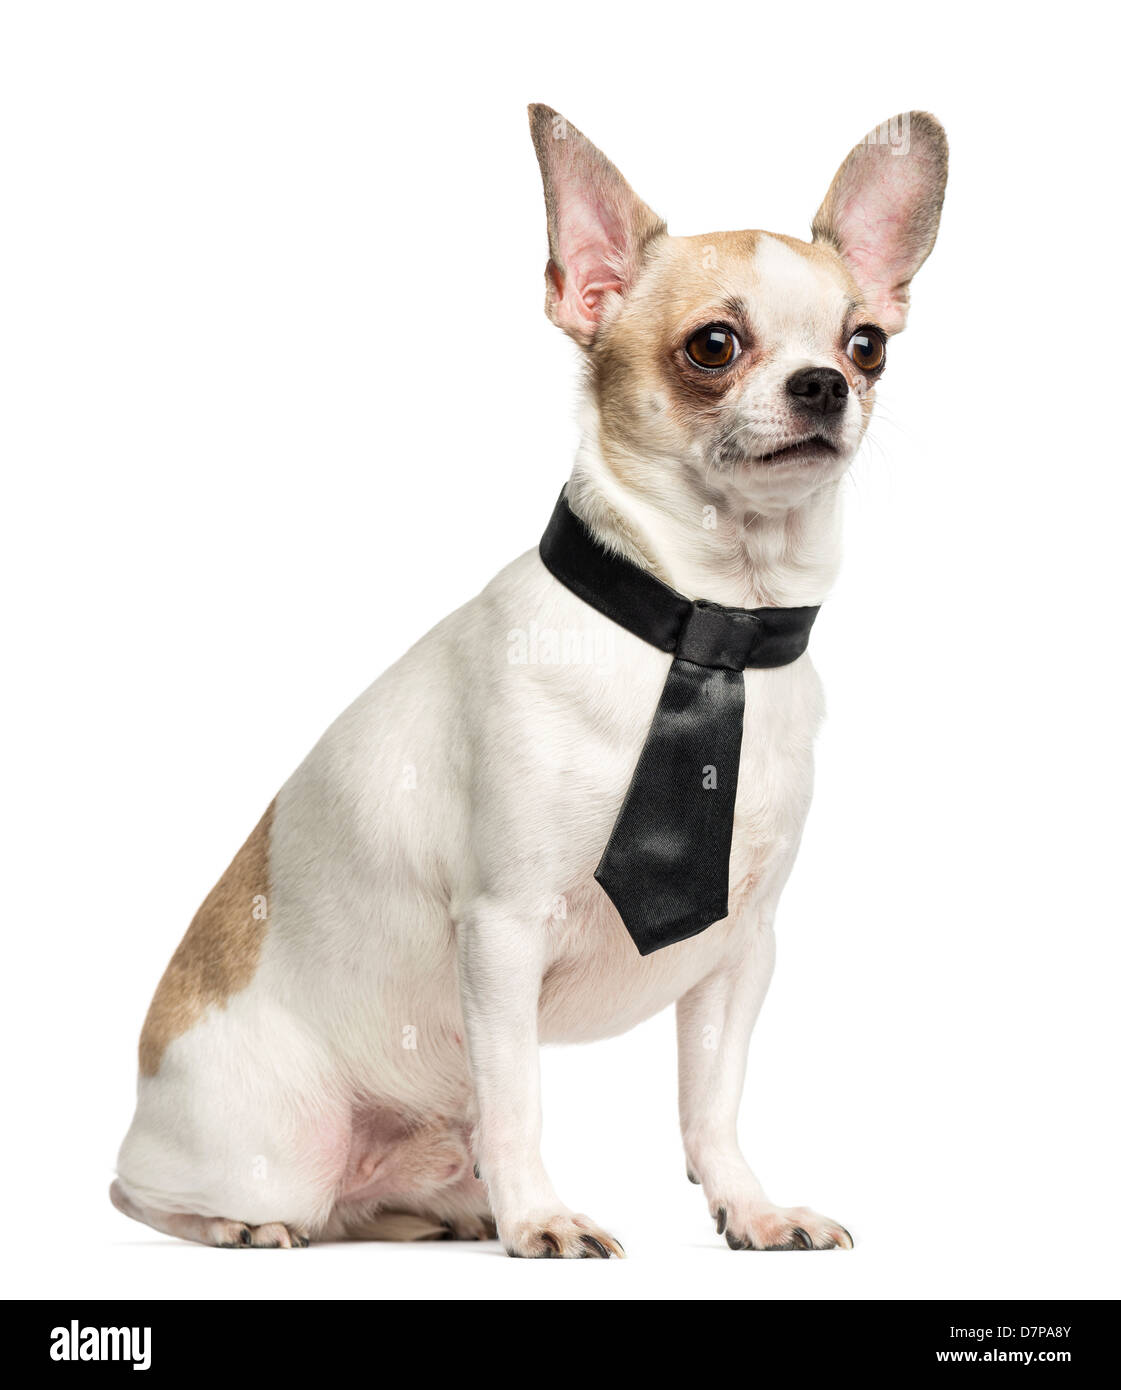 Chihuahua, 2 years old, sitting and wearing a tie against white background Stock Photo